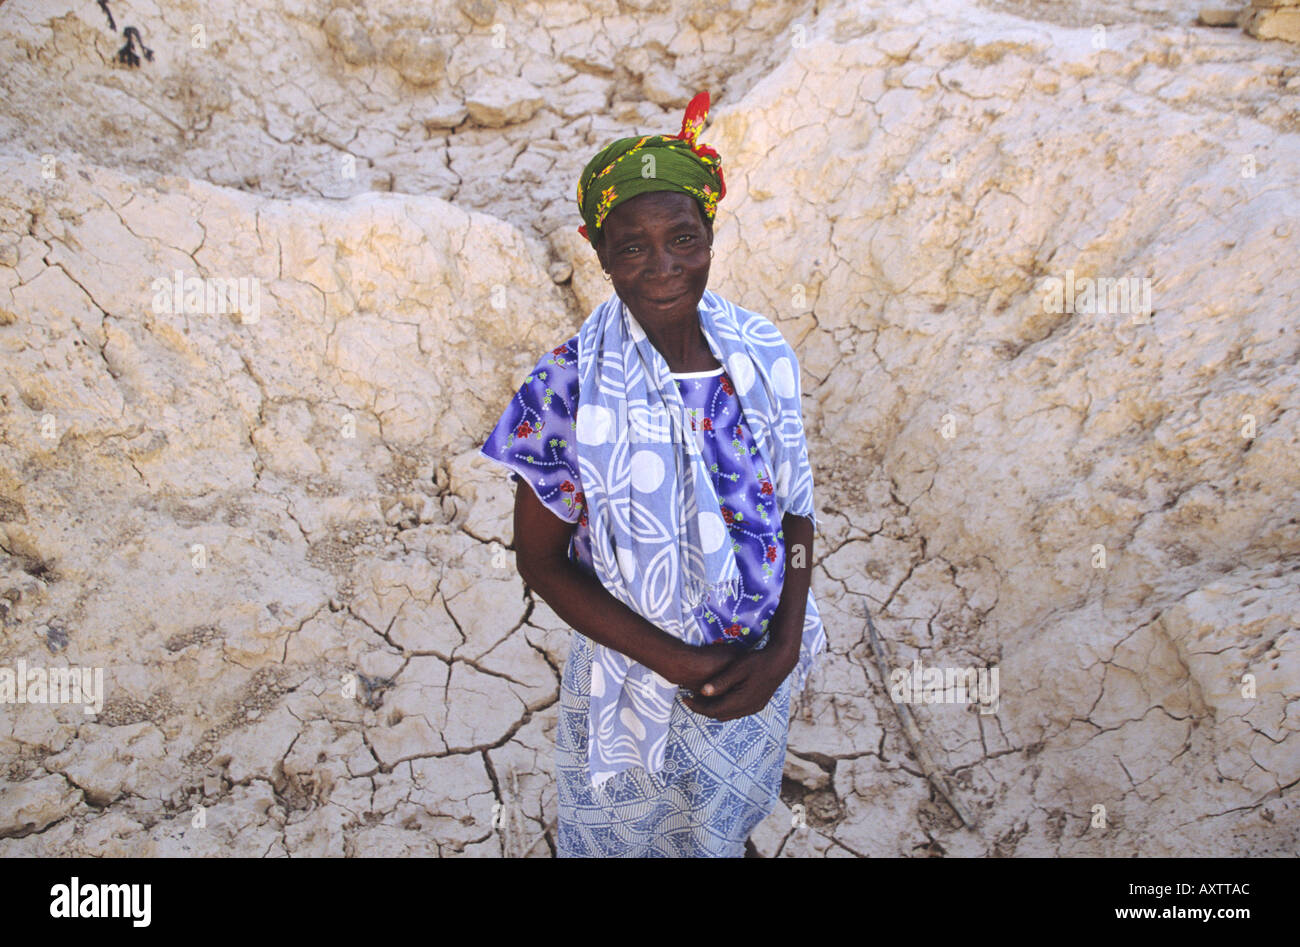 Woman Standing In A Dry River Bed Burkina Faso West Africa Stock